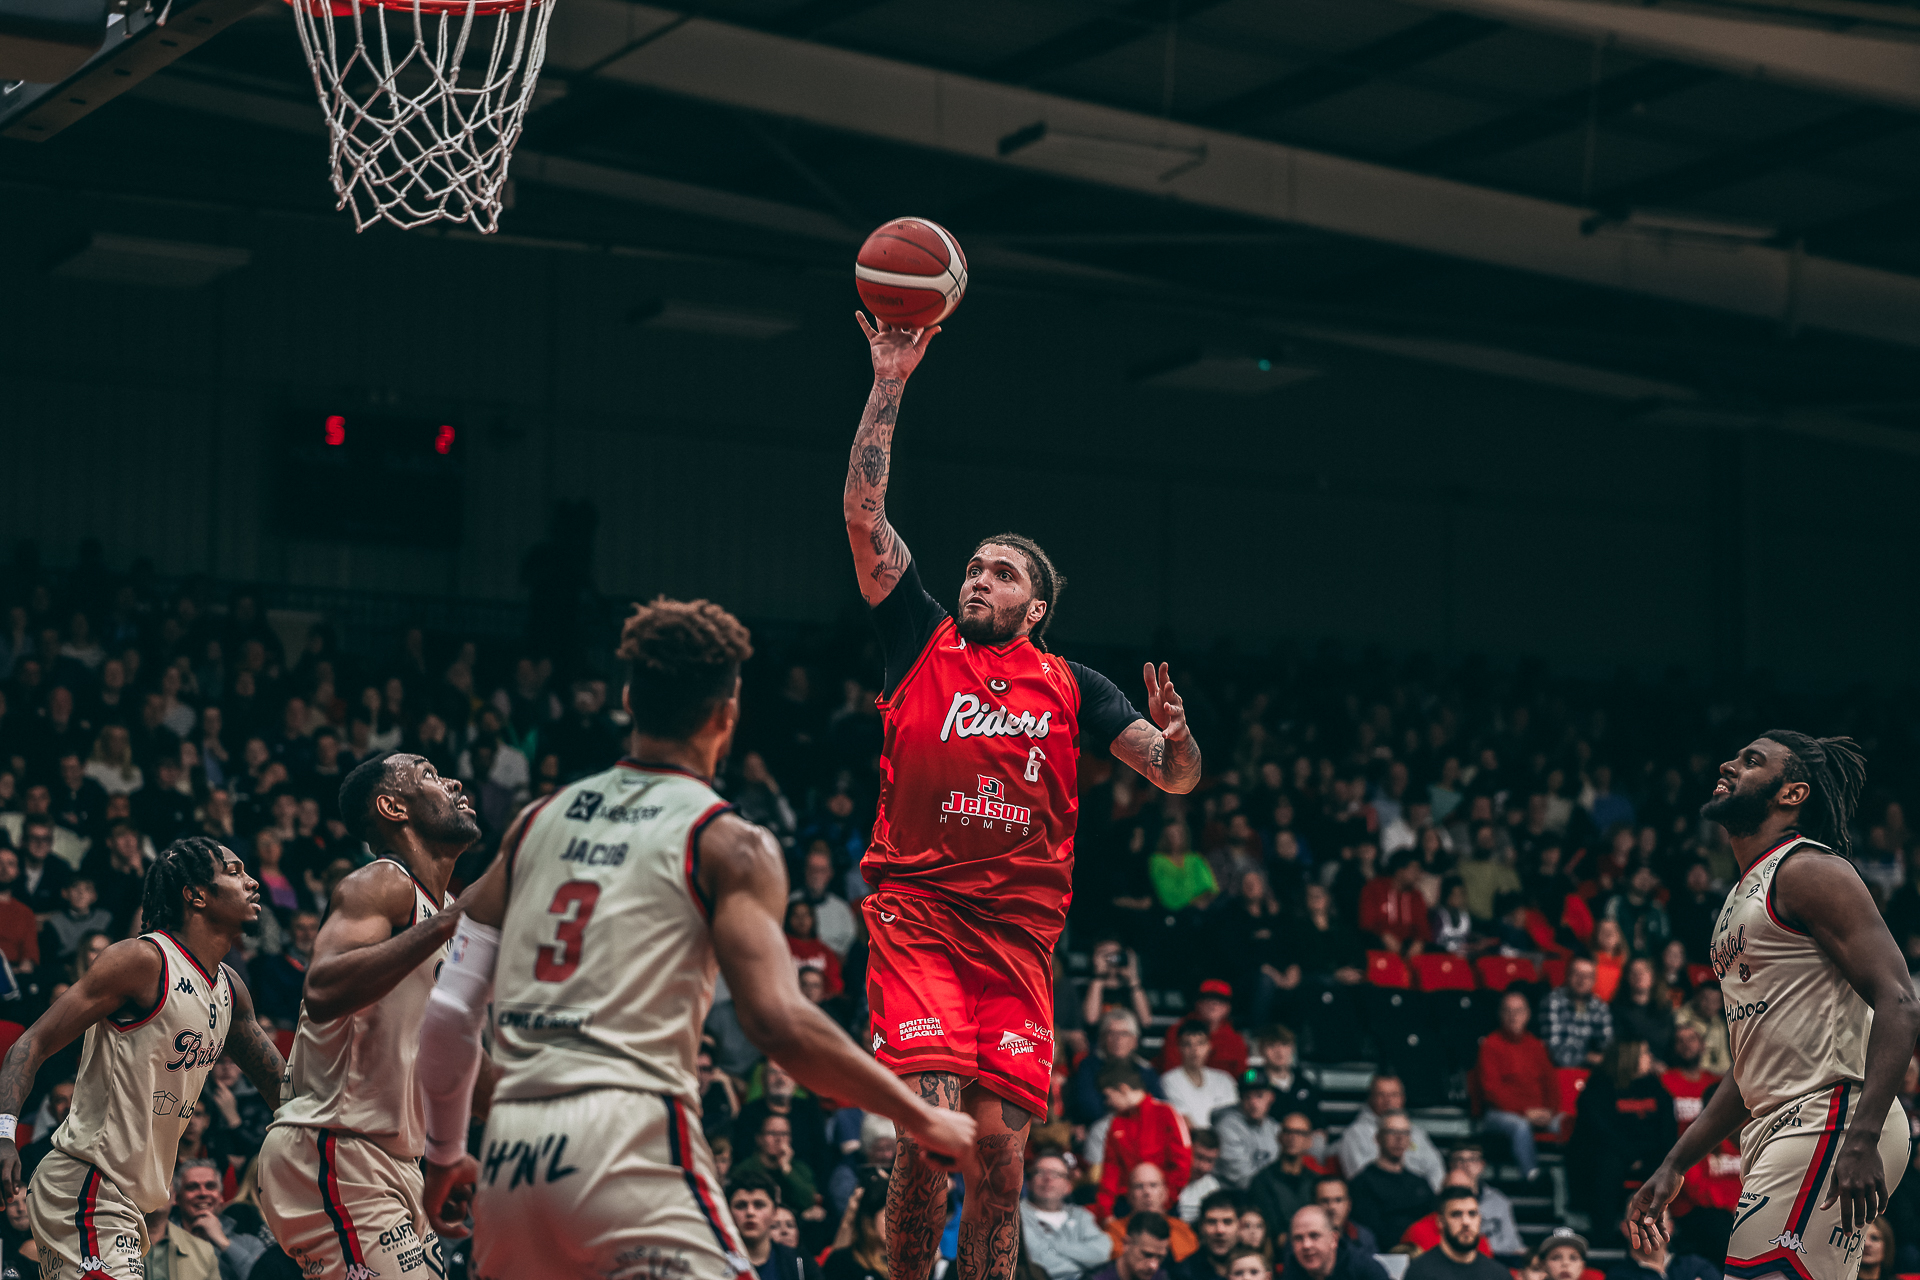 Scouting report: Bristol Flyers